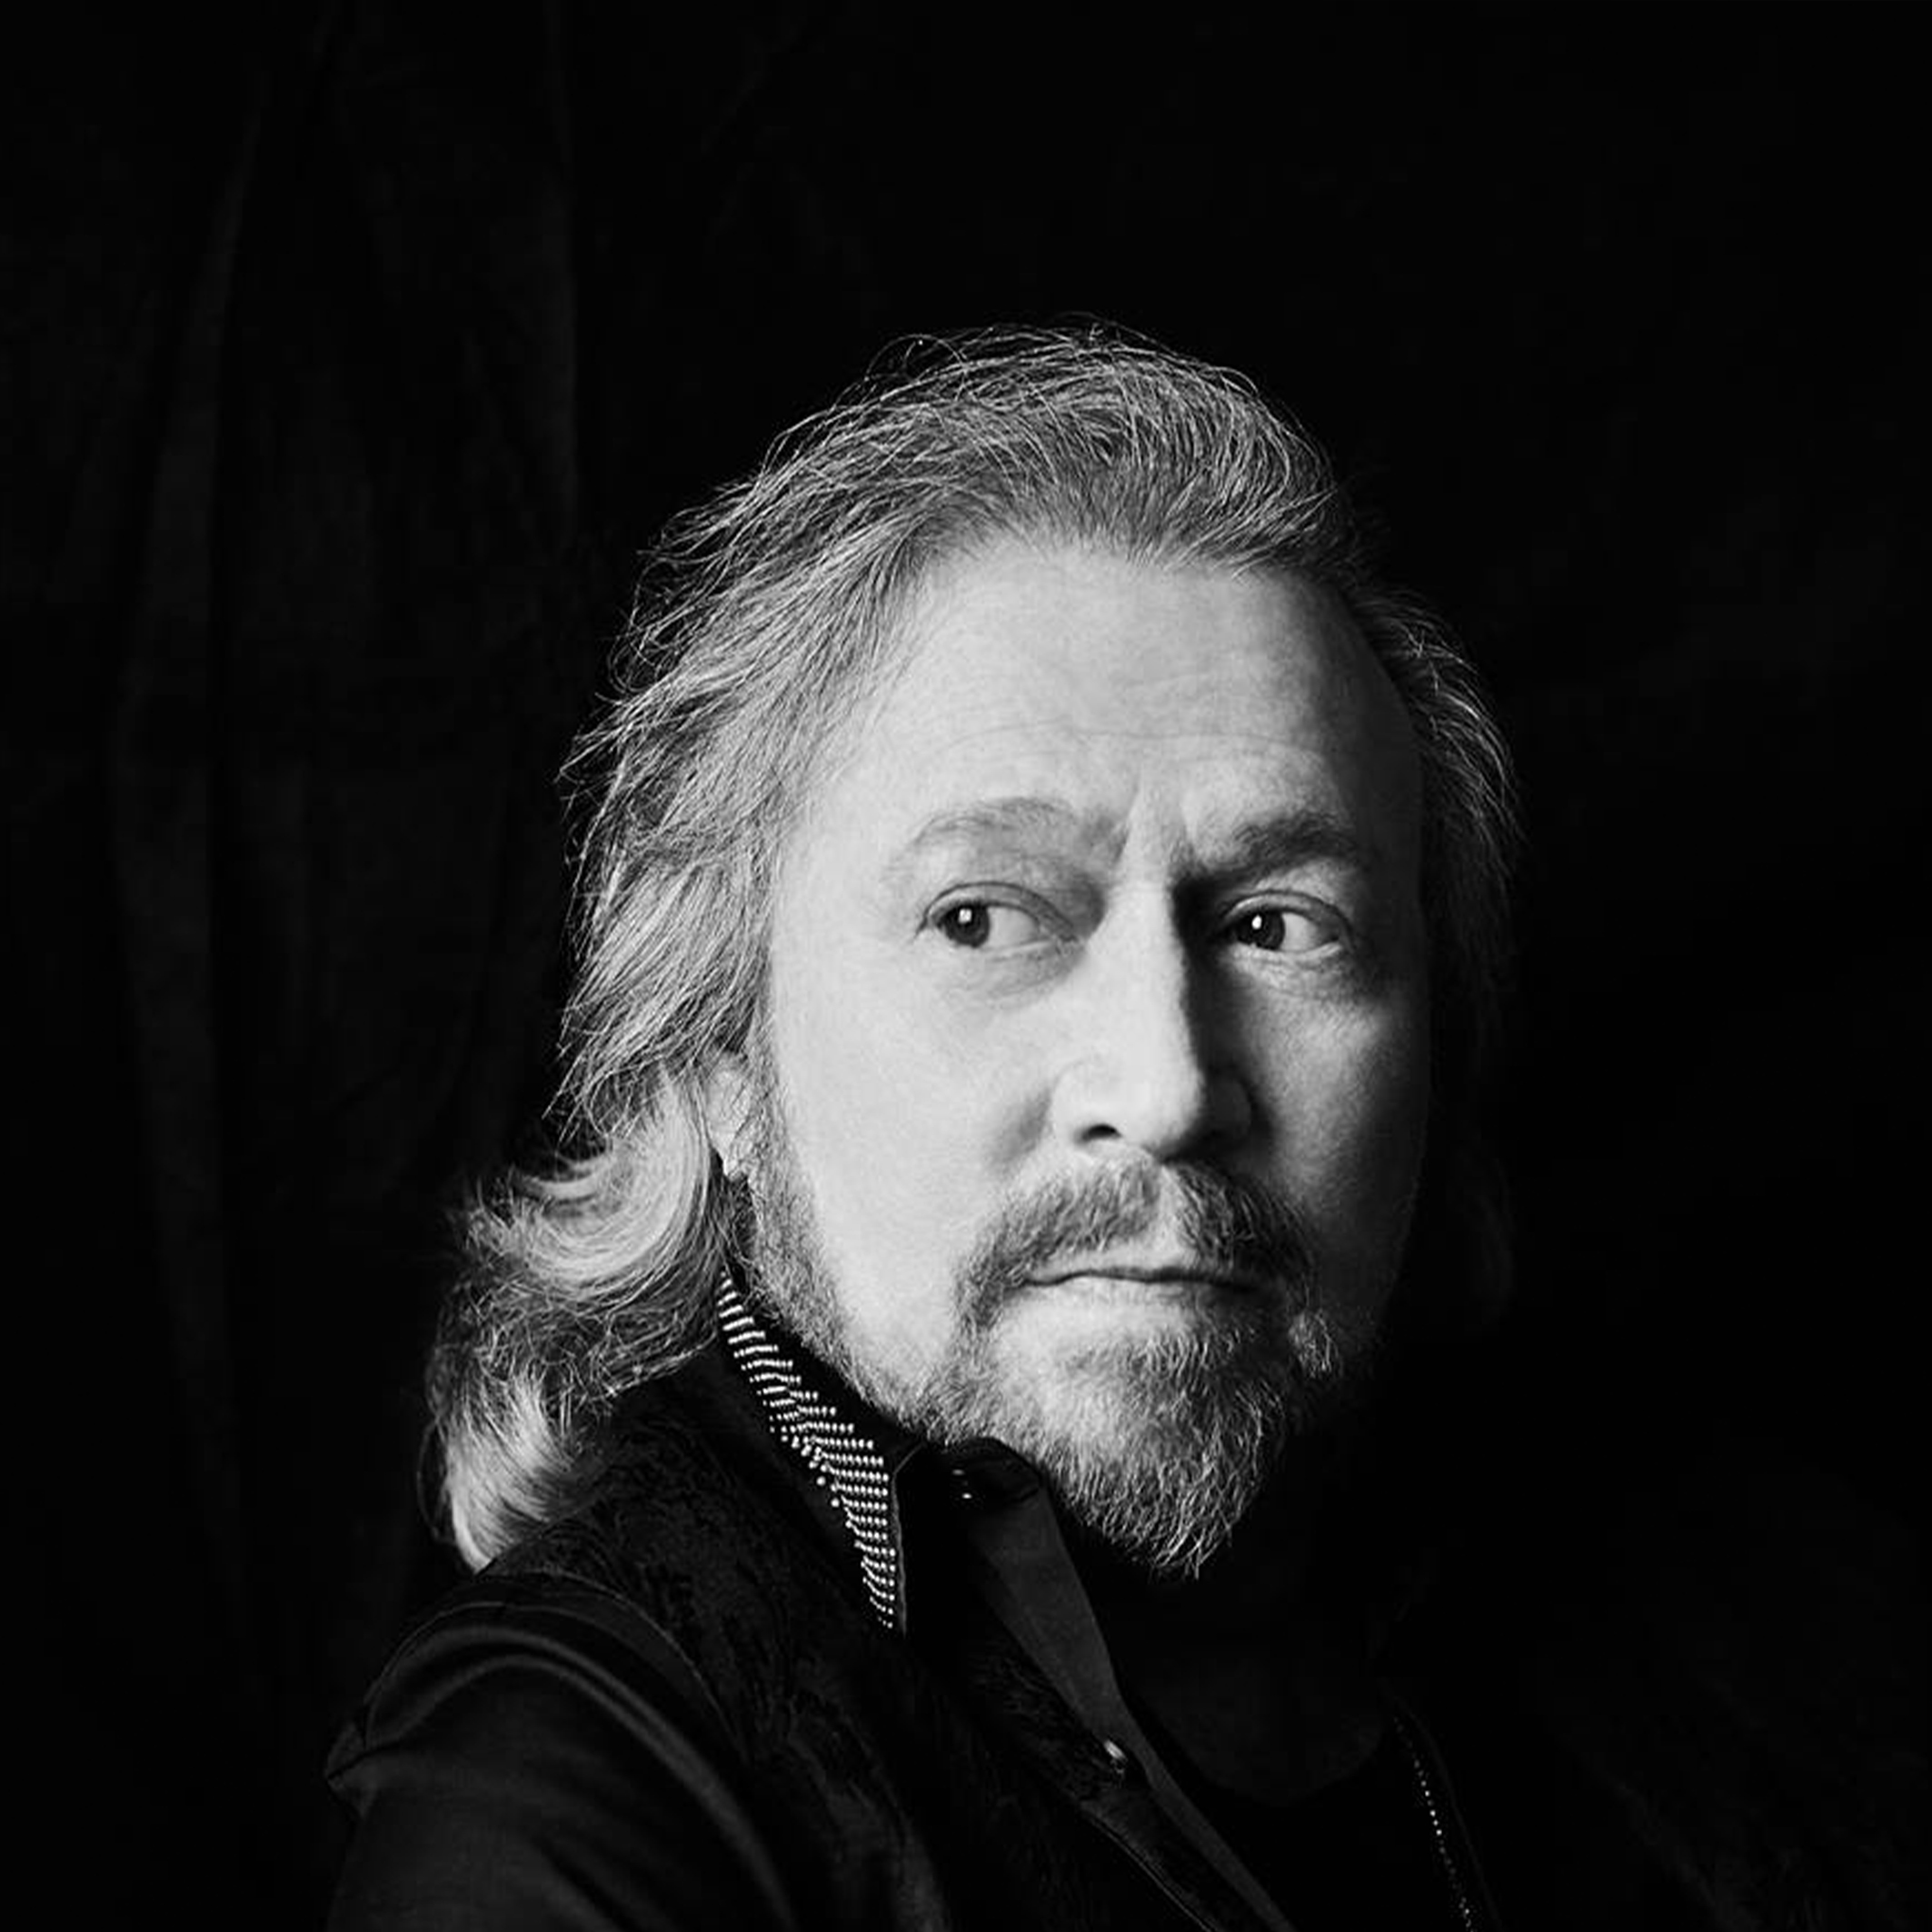 Barry Gibb reveals being victim of child abuse